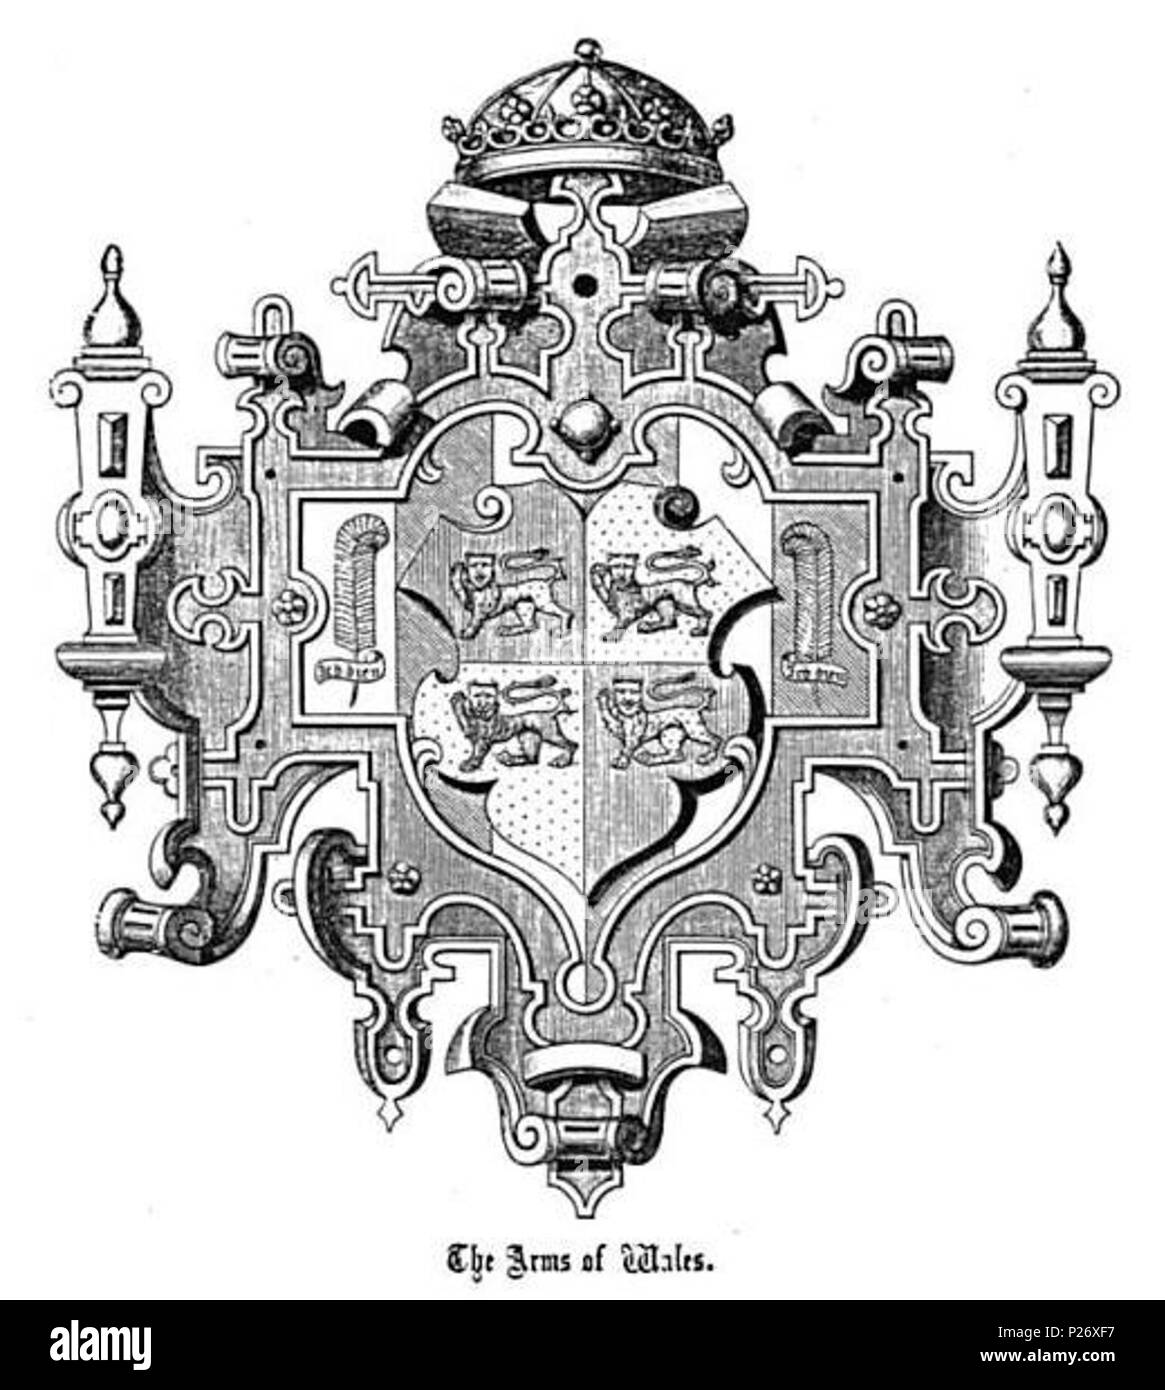 . English: Ultra-ornate version of the Llewelyn arms (see File:Coat of arms of Wales.svg) as described in Annals and Antiquities of the Counties and County Families of Wales: Containing a Record of All Ranks of the Gentry ... with Many Ancient Pedigrees and Memorials of Old and Extinct Families. By Nicholas, Thomas, Published by Longmans, Green, Reader, 1872, p. X. As described in, 'Annals and Antiquities of the Counties and County Families of Wales, 1872': The Arms of Wales emblazoned on the cover and Frontispiece are the same as those given in the Heraldic Visitations of Wales, by Lewys Dwnn Stock Photo